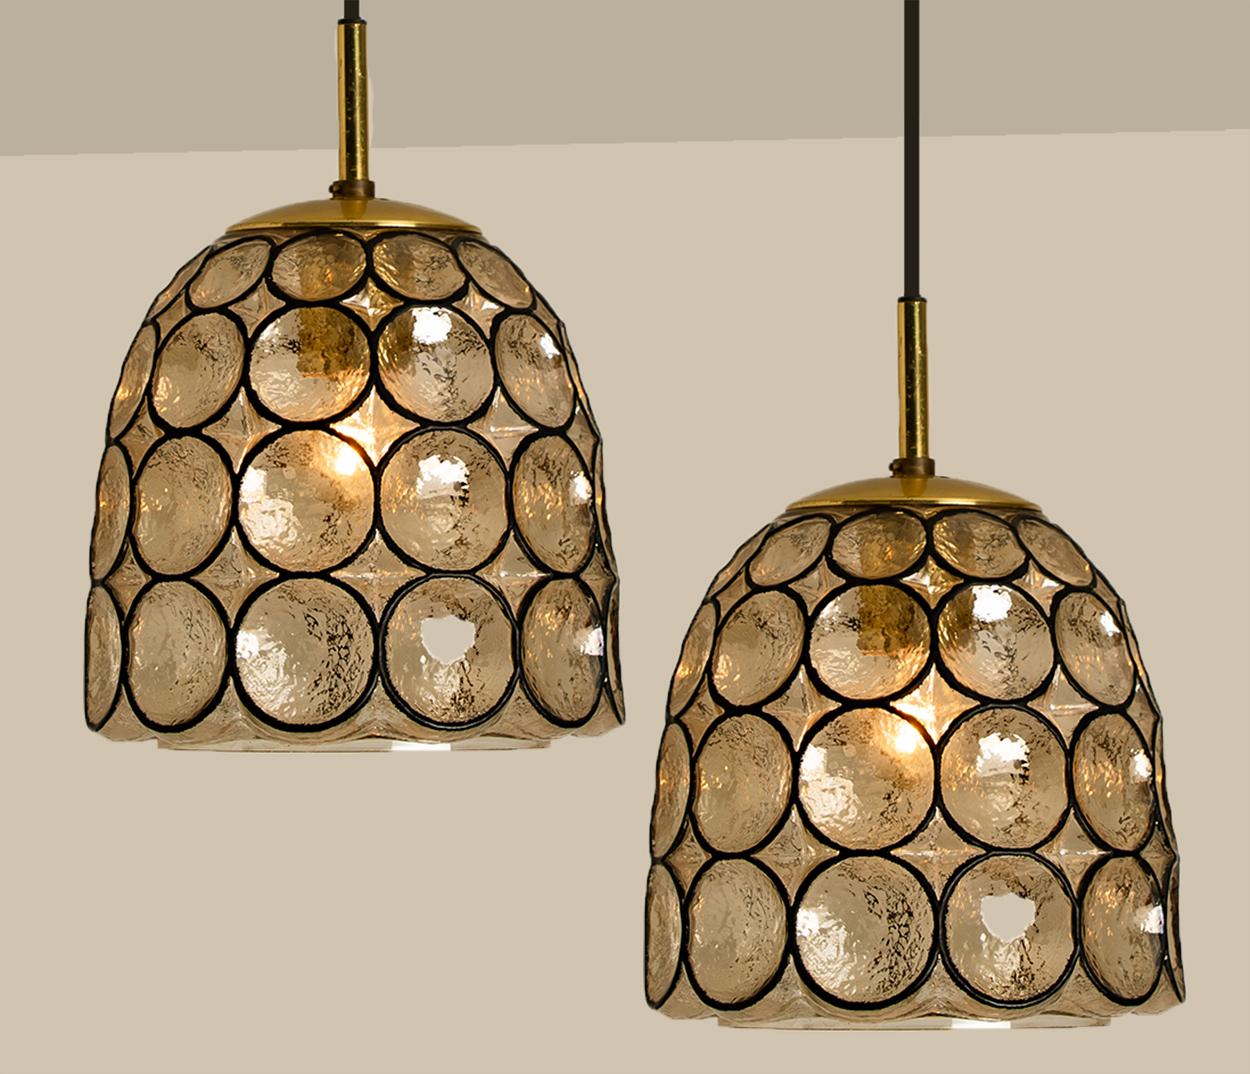 Minimal, geometric and simply shaped design. This beautiful and unique pair of hand blown glass chandeliers/pedant lights were manufactured by Glashütte Limburg in Germany during the 1970s (late 1960s or early 1970s). Beautiful craftsmanship. These